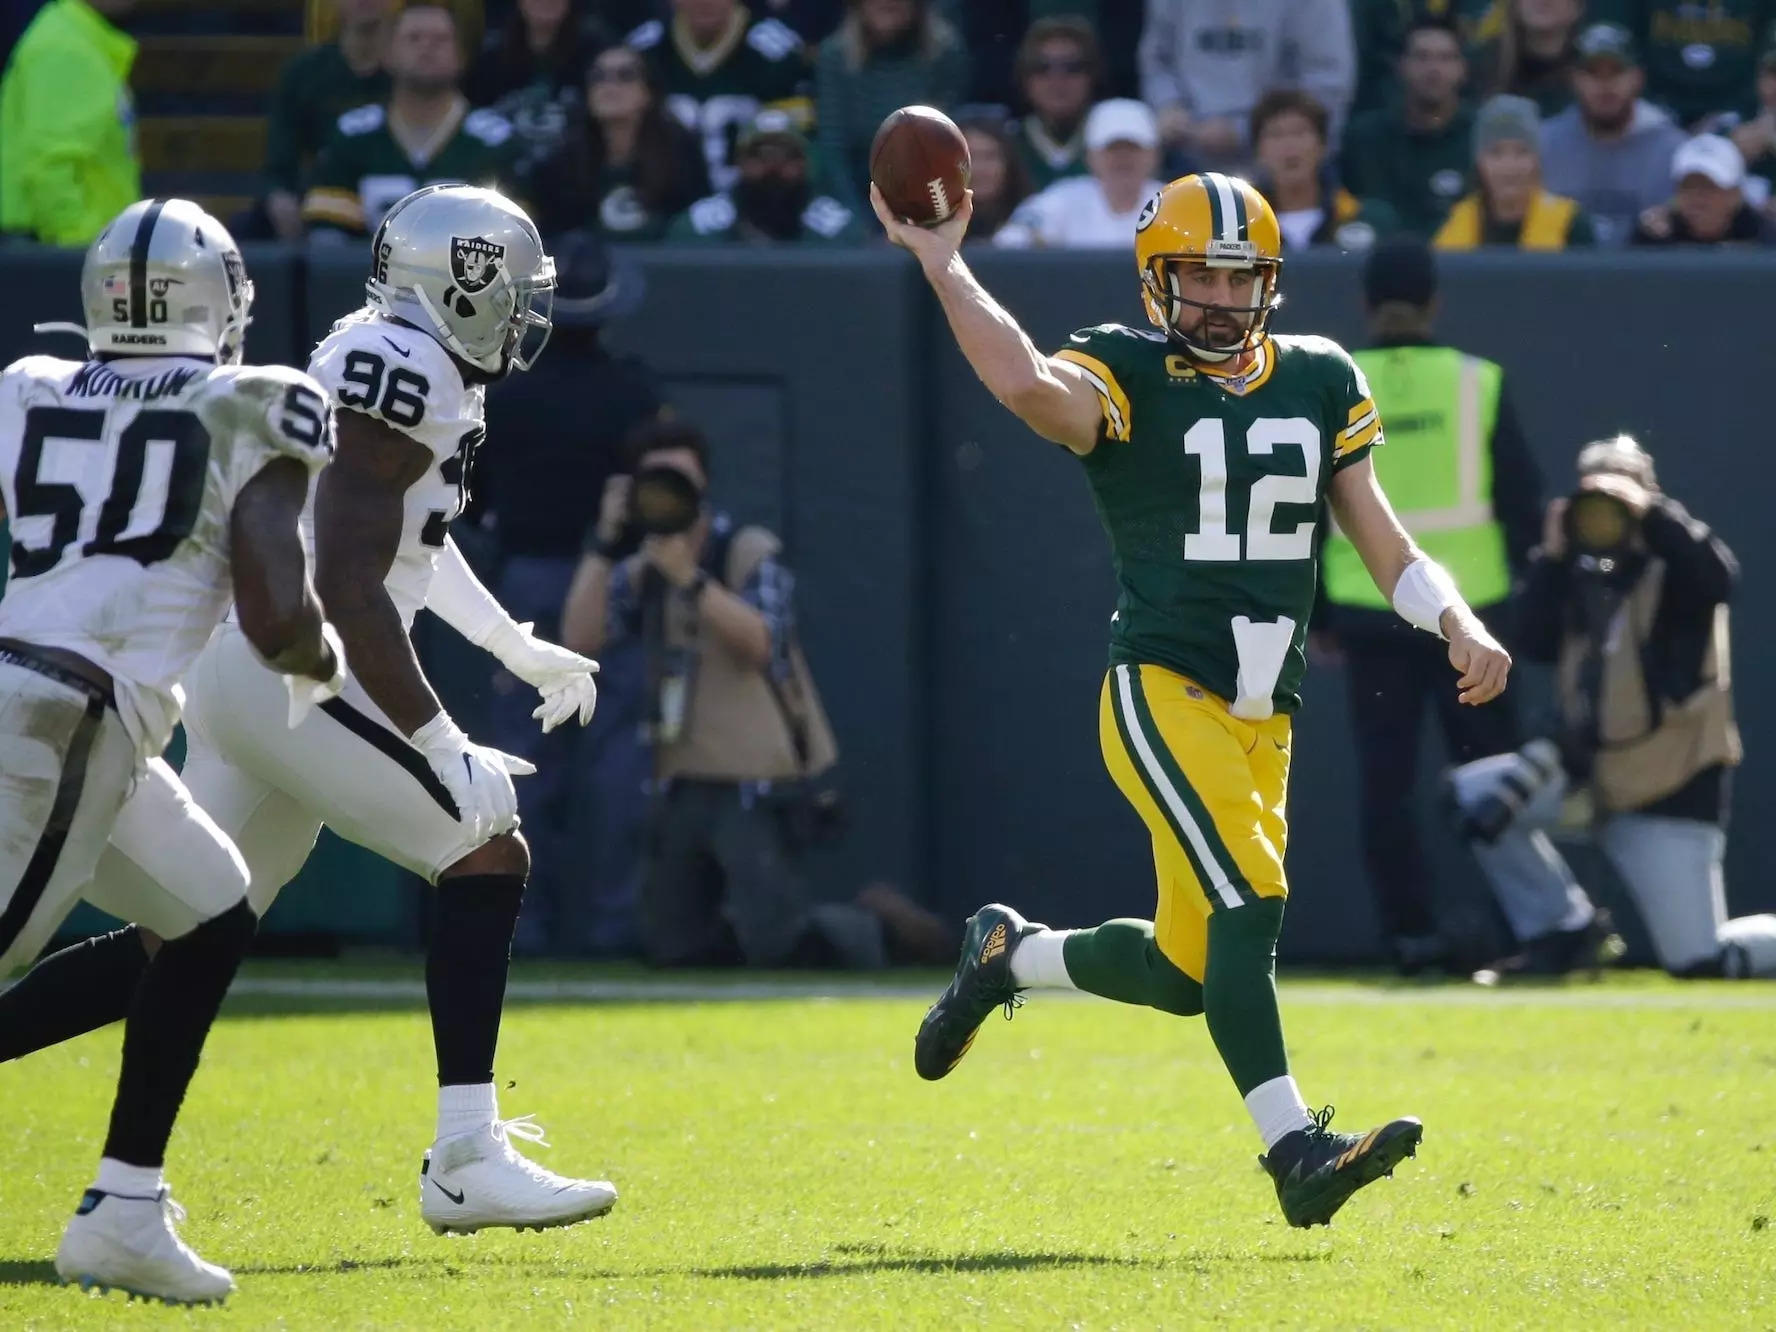 Aaron Rodgers makes a throw off the wrong foot while being chased by Raiders defenders.